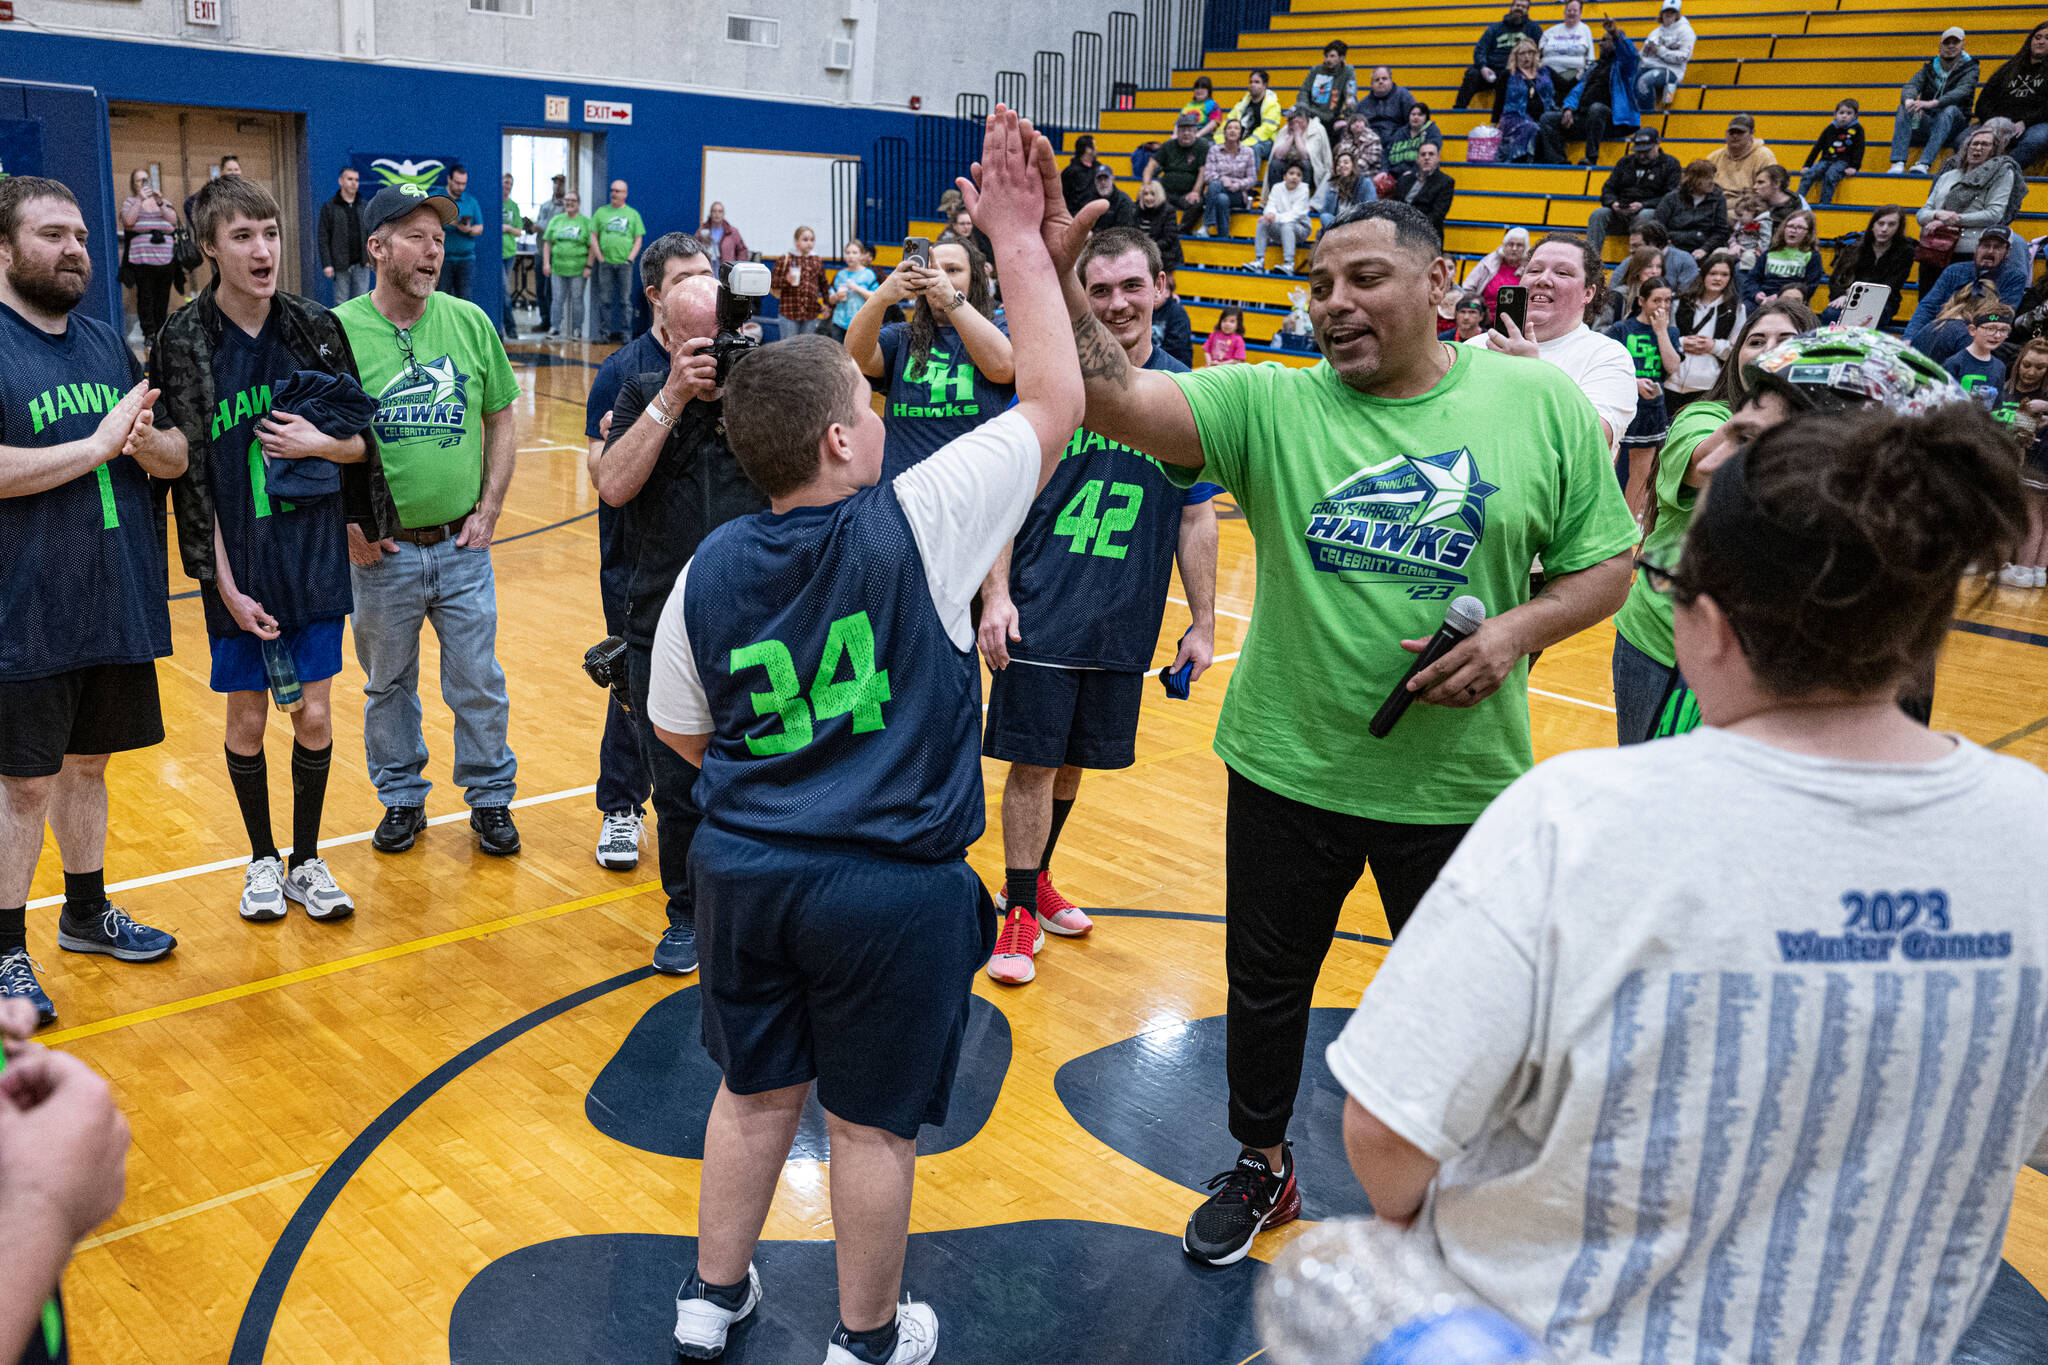 Mary White
Gerald Smiley, former Texas Rangers pitcher, high-fives Kyler Parmley at the 2023 Grays Harbor Hawks celebrity basketball game.